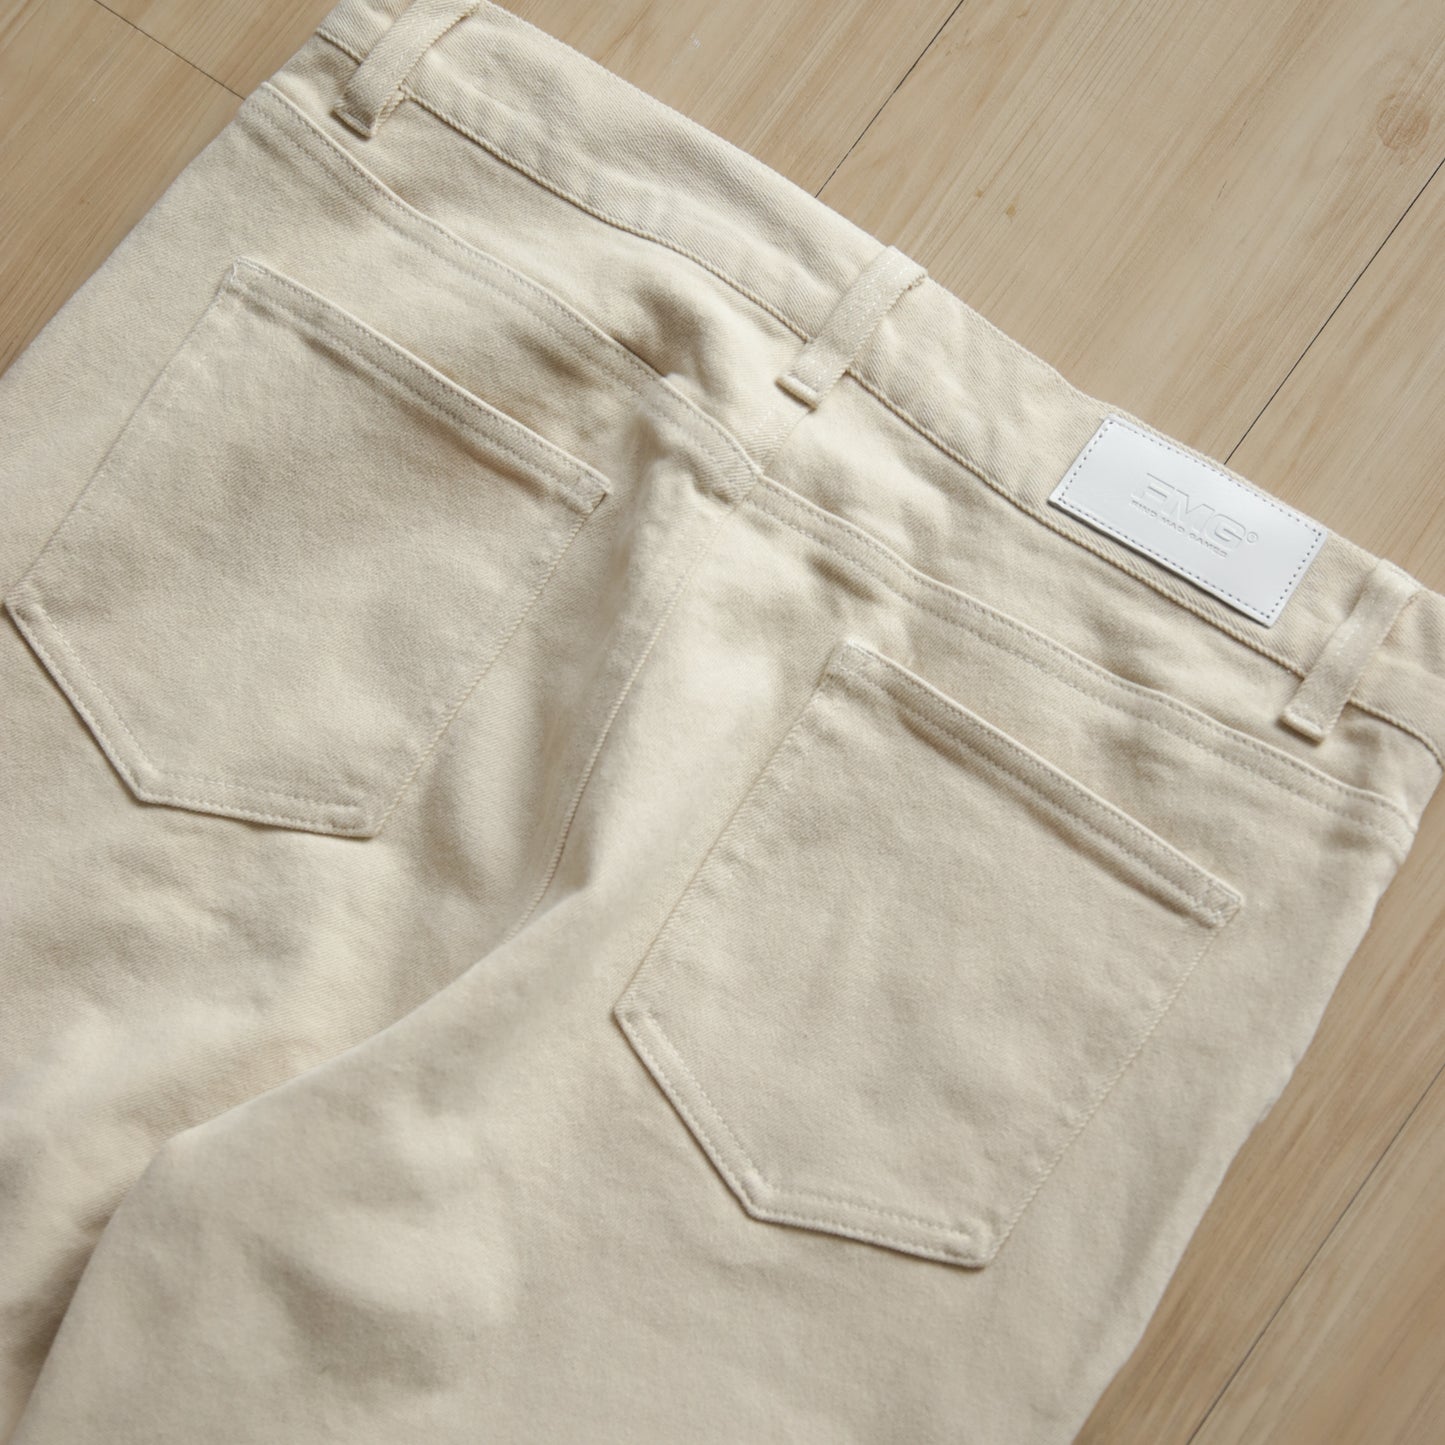 FMG Washed Flared Pants